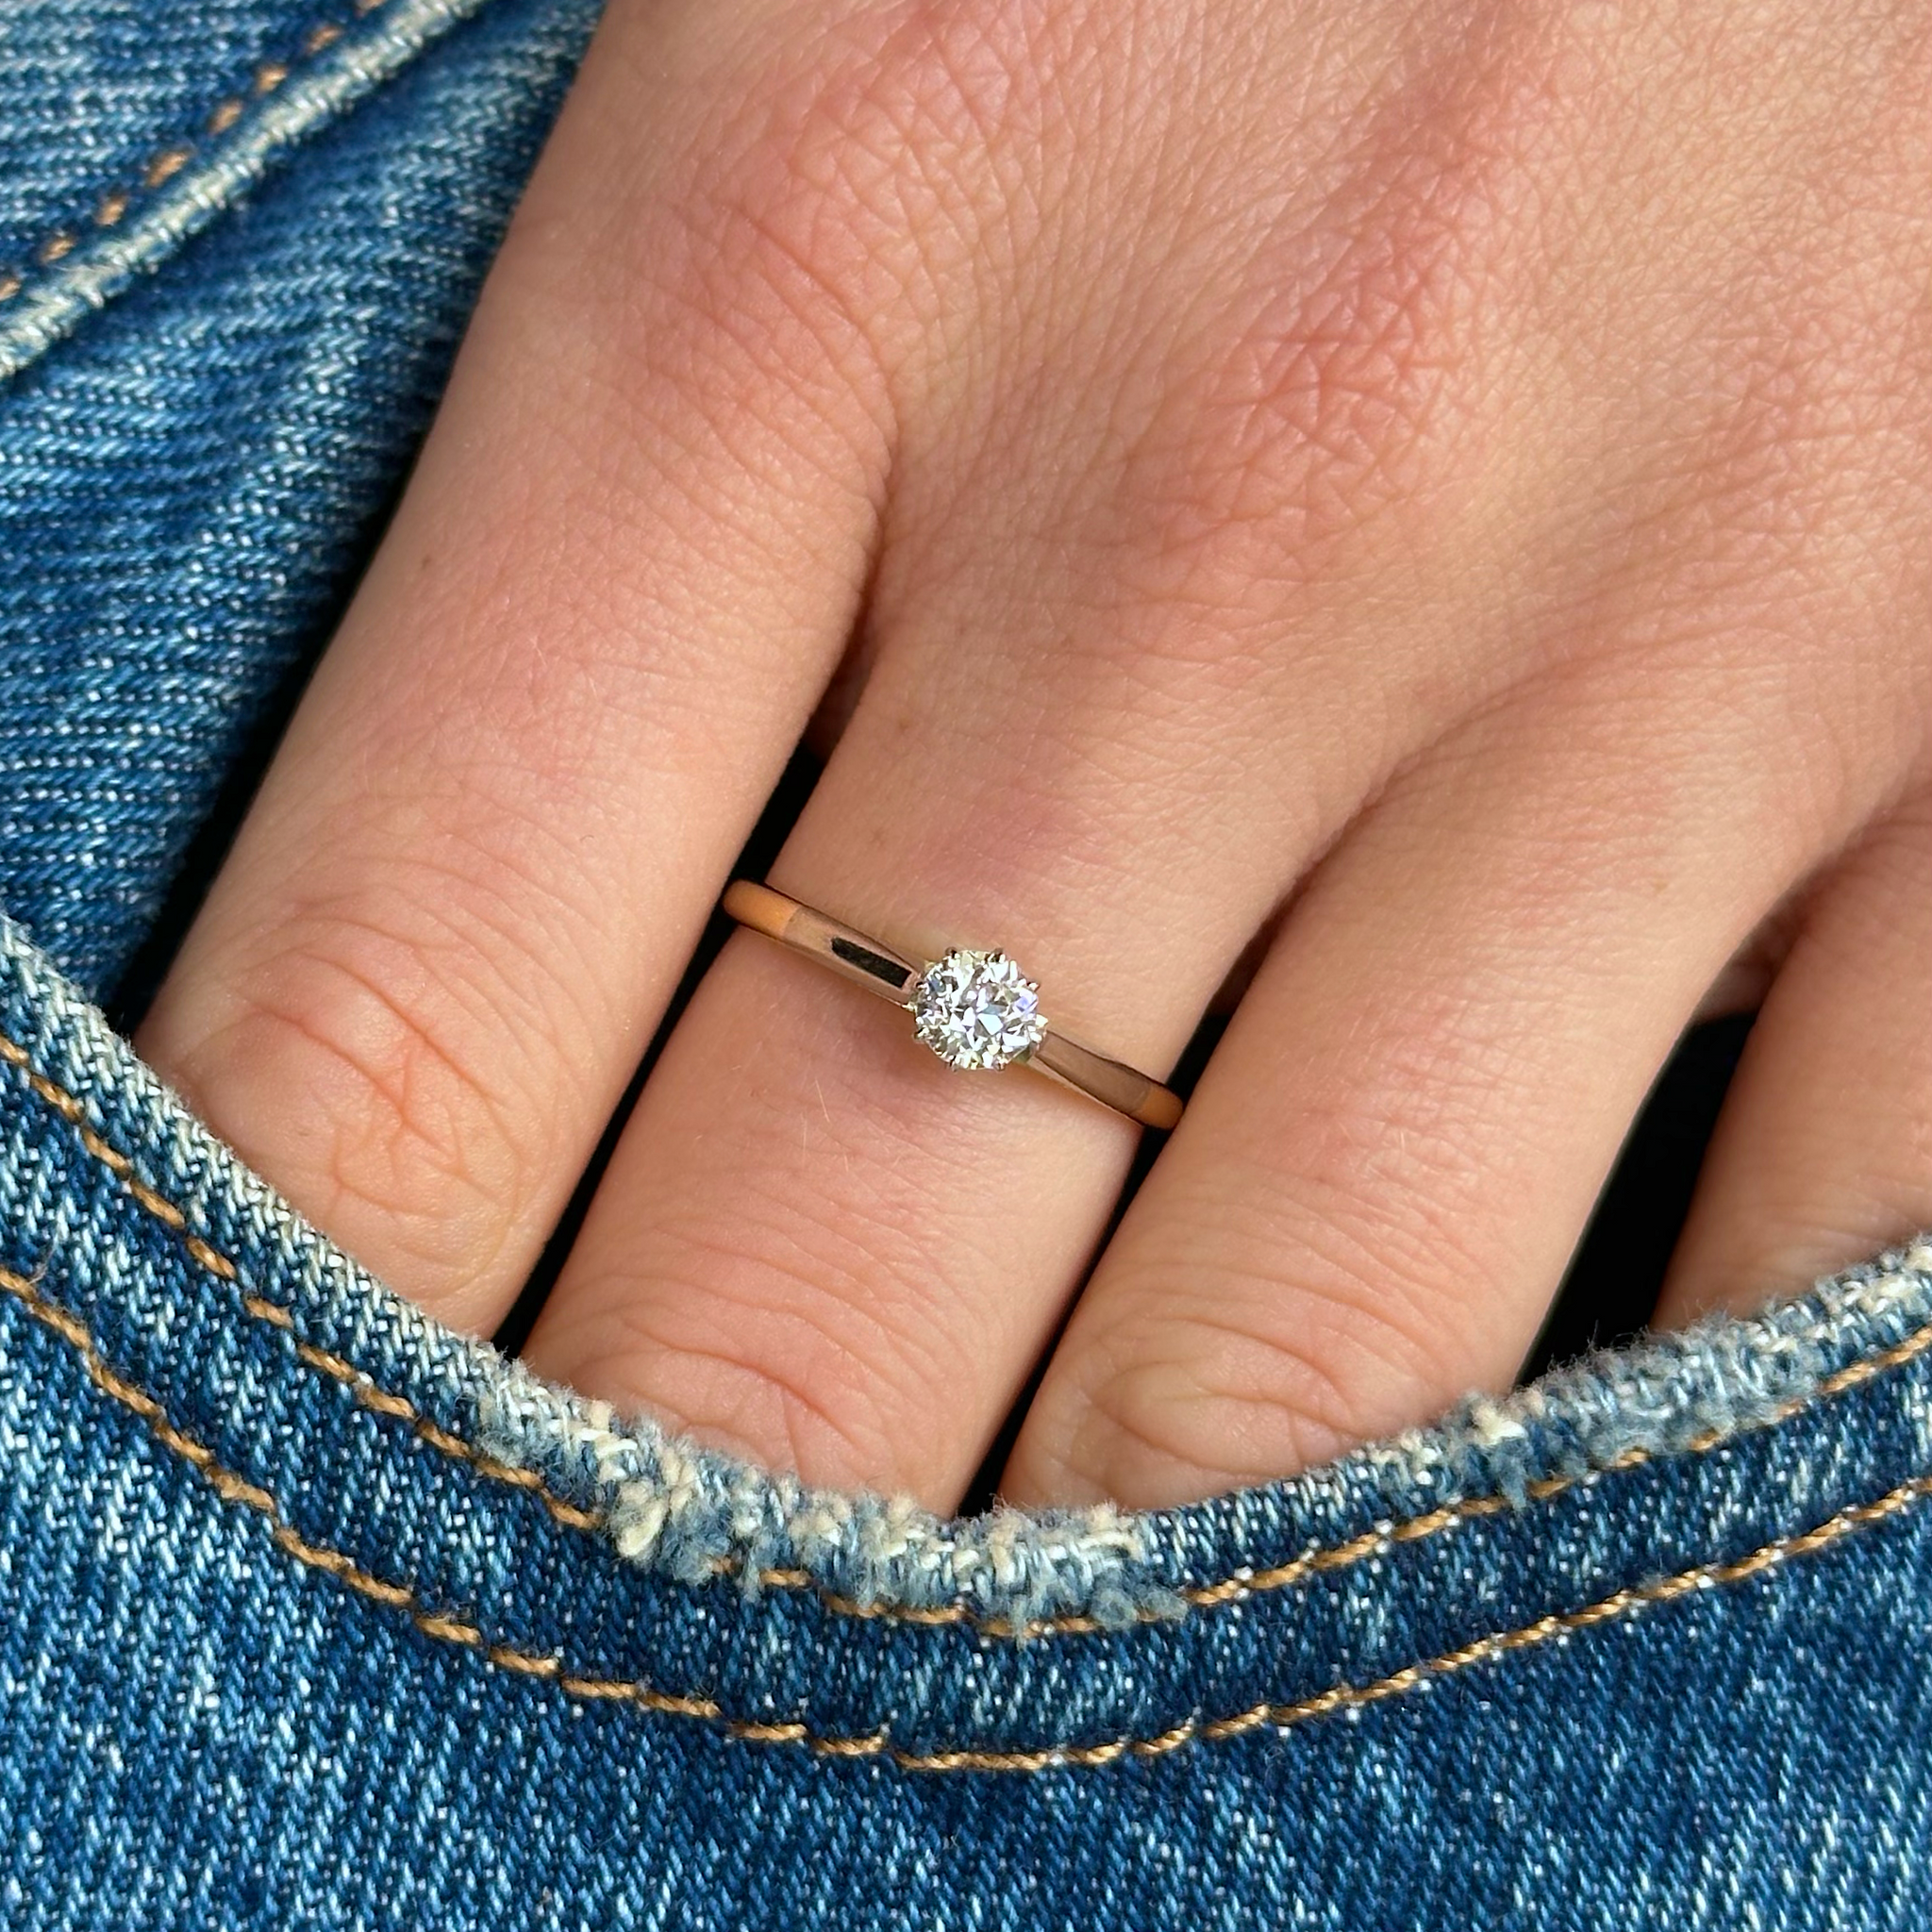 Antique, Edwardian Solitaire Diamond Engagement Ring, 18ct Yellow Gold and Platinum worn on hand in pocket of jeans